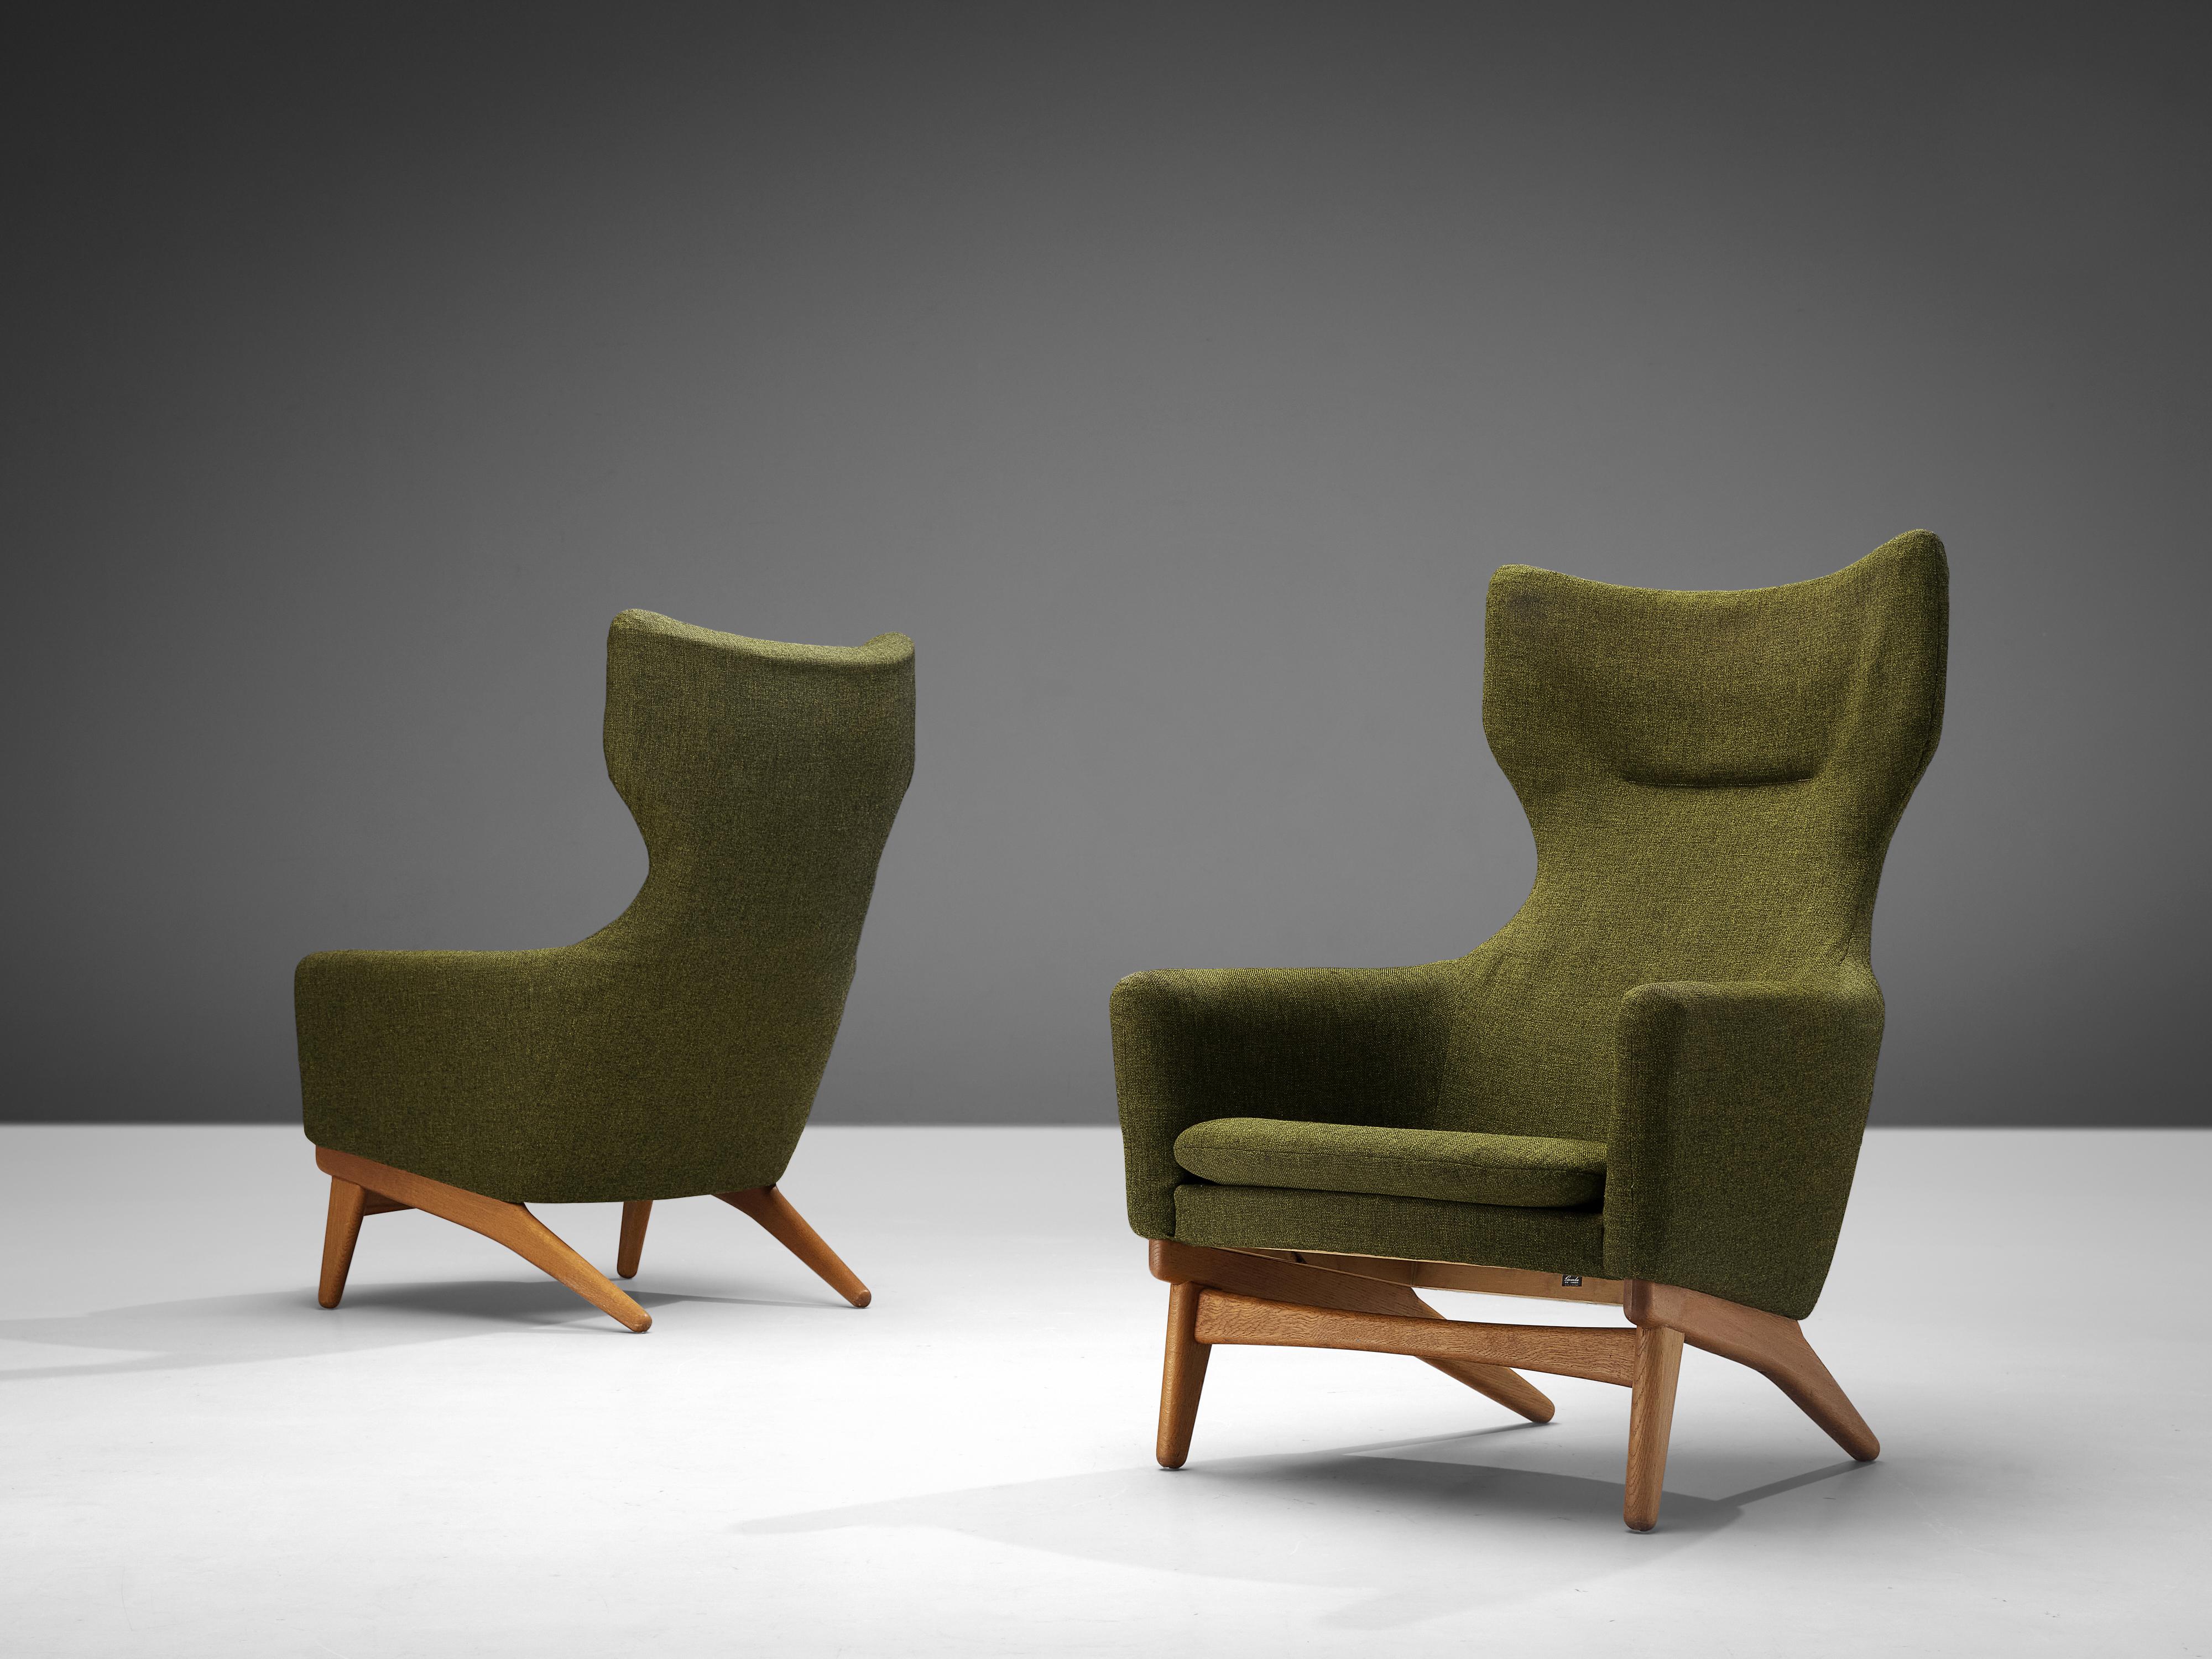 Poul M. Volther for Gemla, pair of lounge chairs model ‘Korall’, teak, fabric, Sweden, designed in 1959

Rare pair of ‘Korall’ lounge chairs by Danish designer Poul M. Volter and produced by Swedish manufacturer Gemla. The ‘Korall’ model features